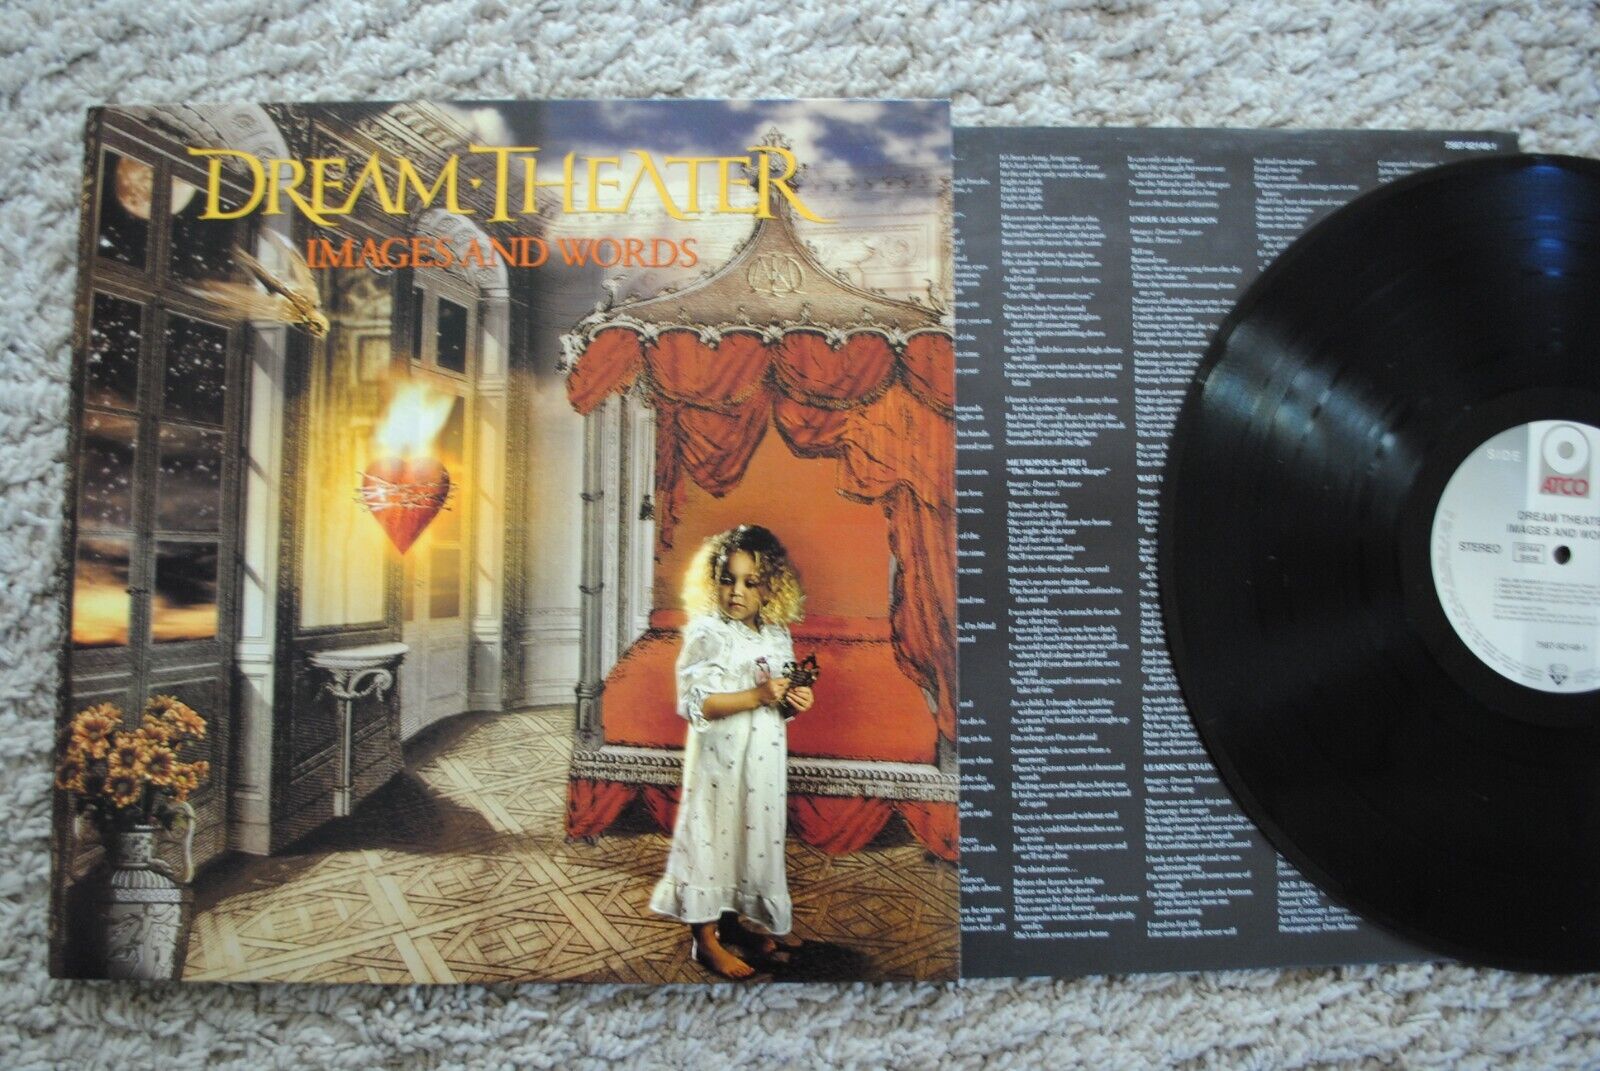 1-x-vinyl-first-press-dream-theater-images-and-words-atlantic-1992-kiss